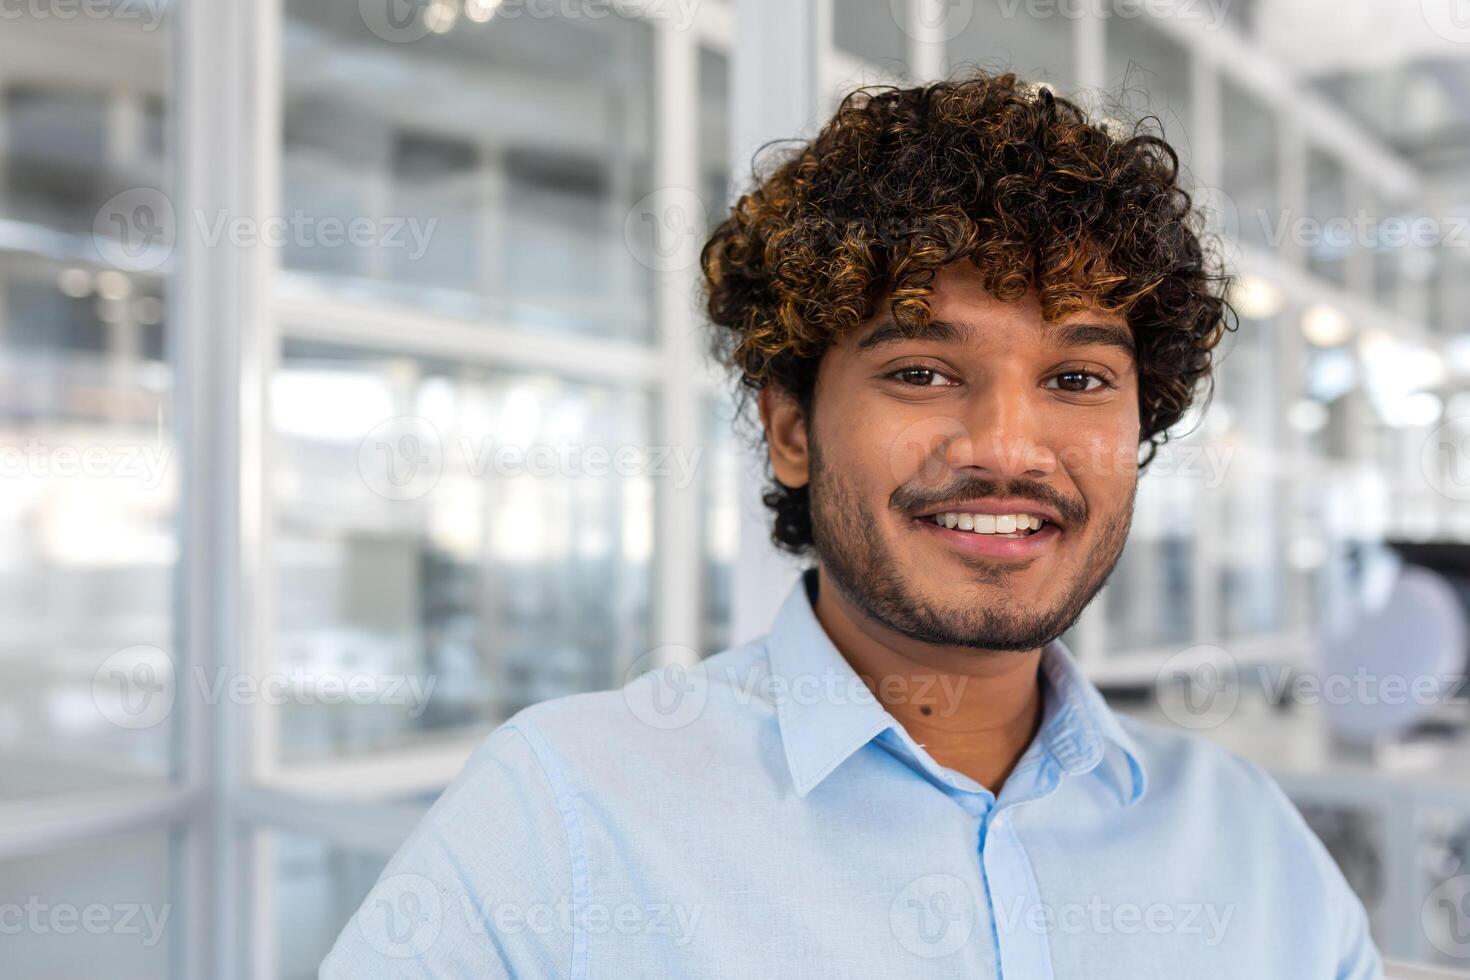 Young smiling indian programmer close up smiling and looking at camera, portrait of man with curly hair and blue shirt inside office at work, businessman entrepreneur with beard working on project. photo